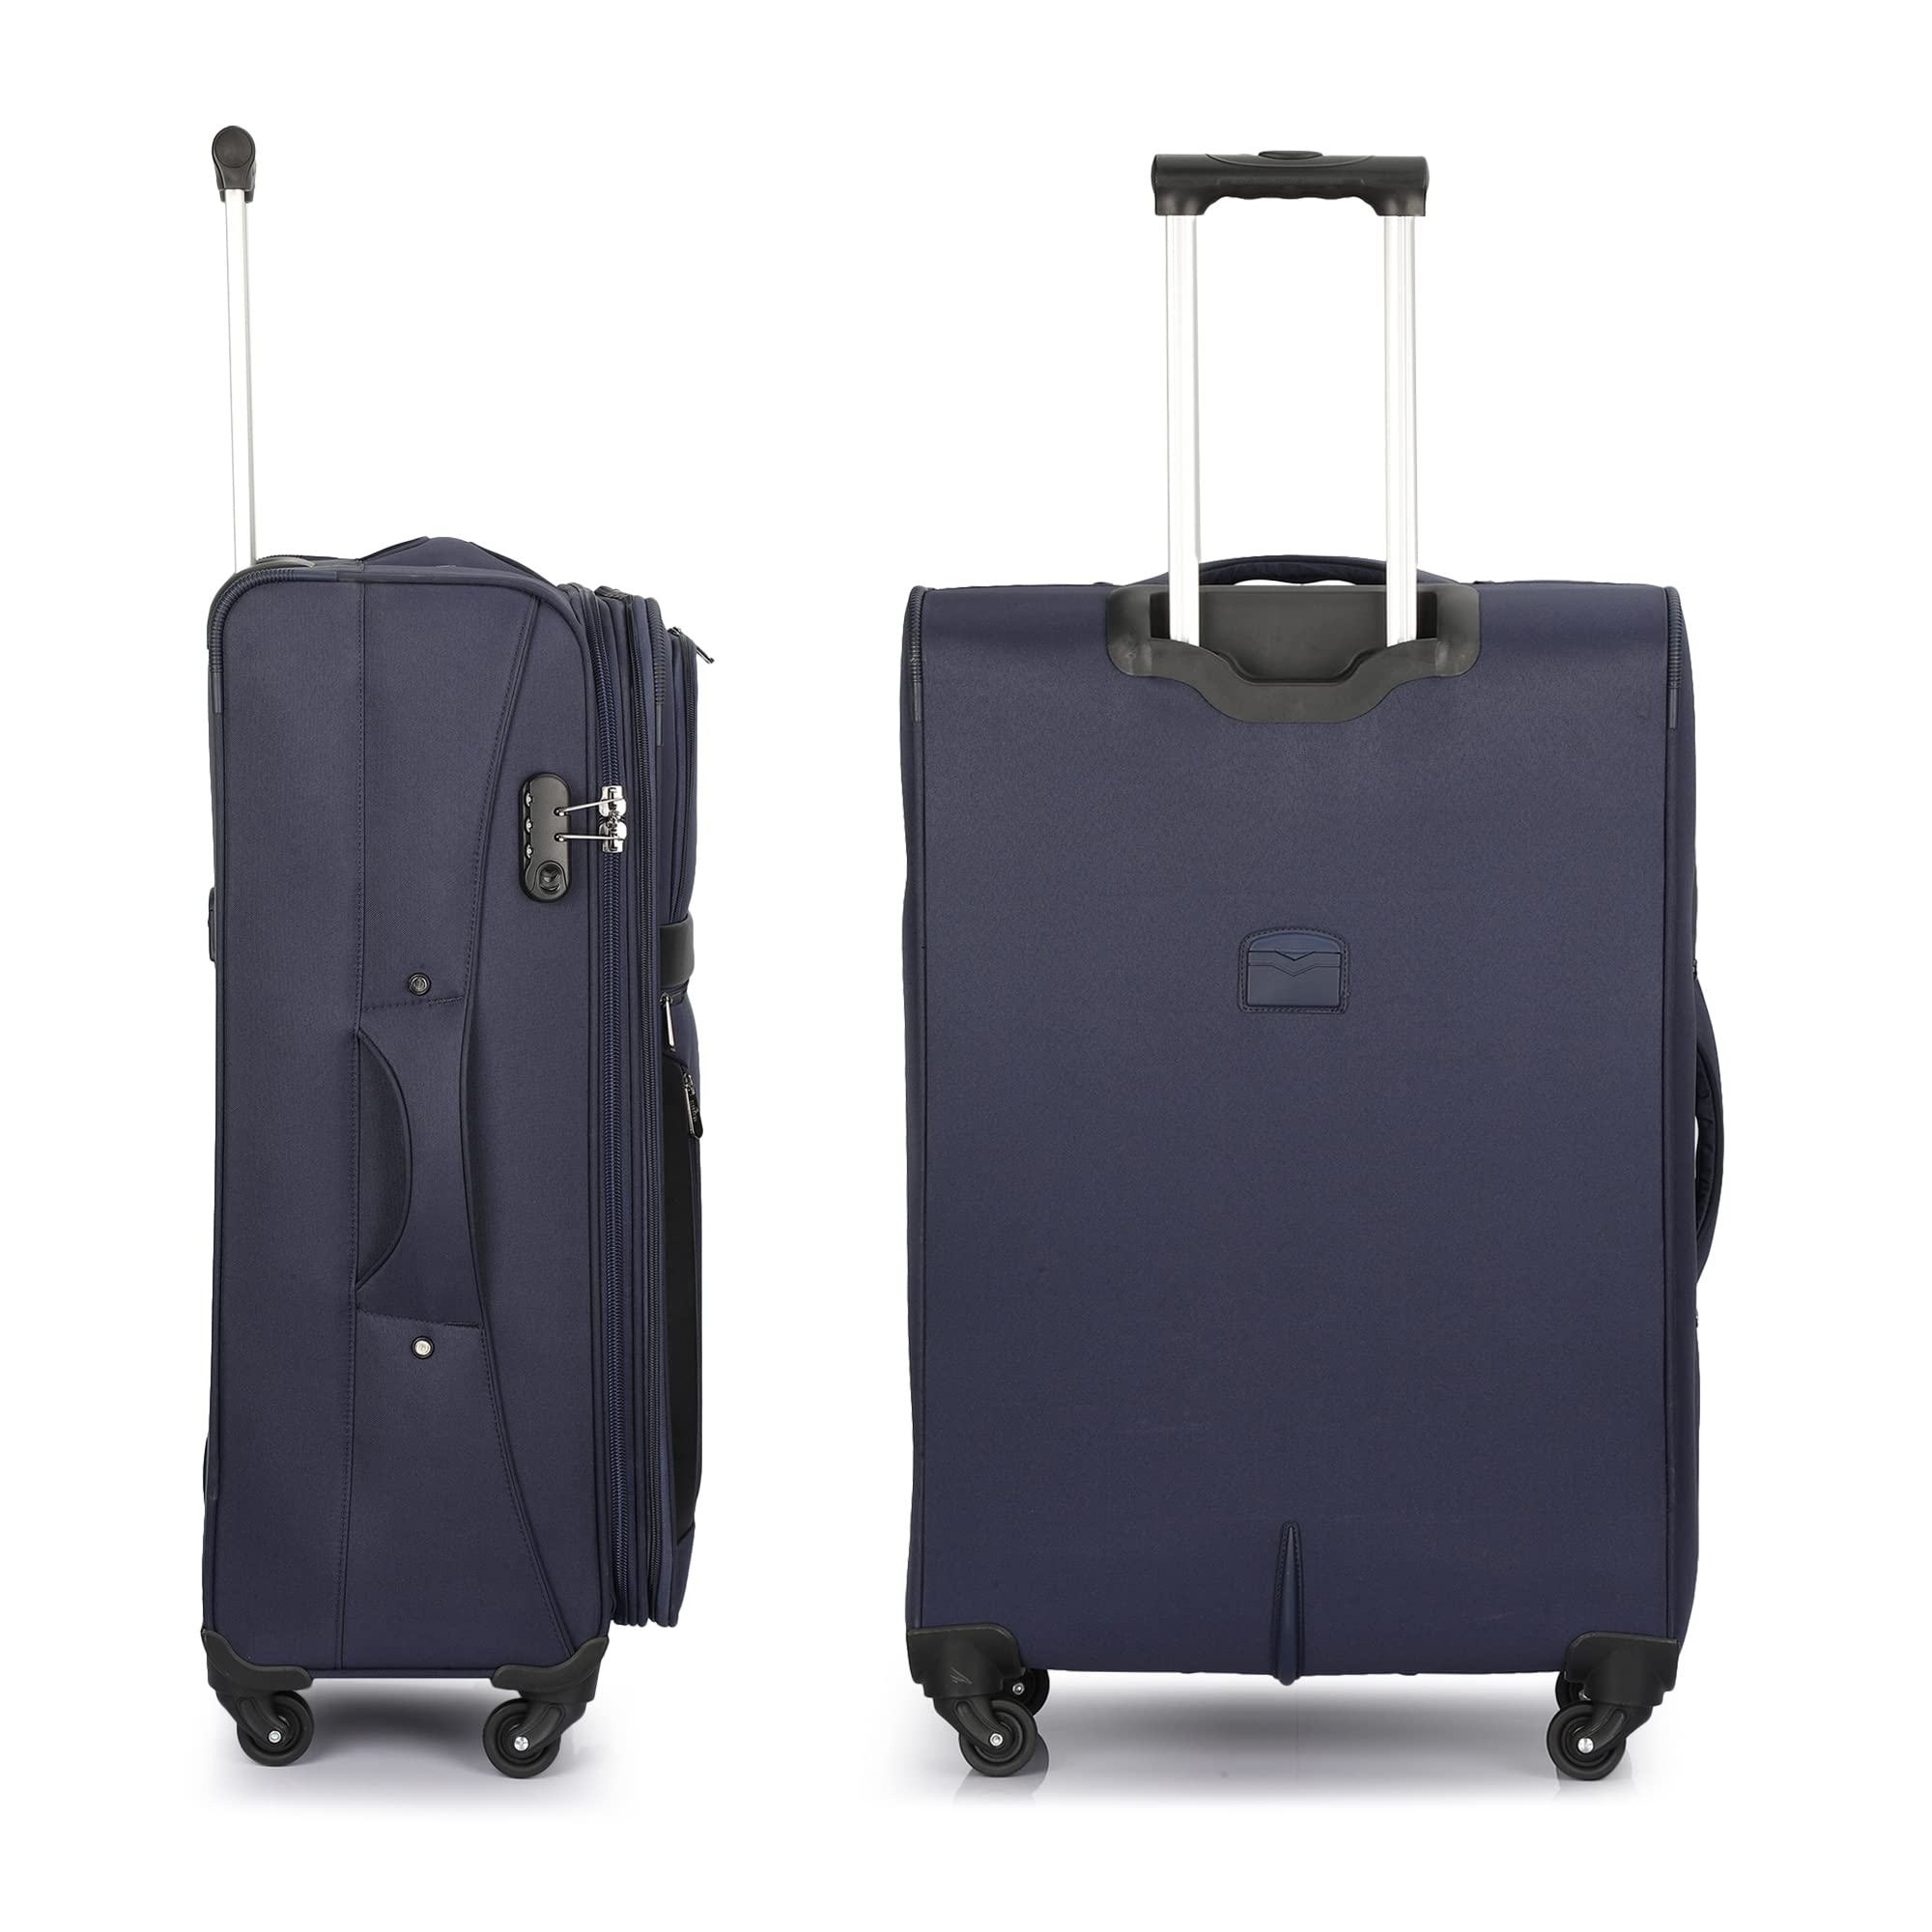 The Clownfish Faramund Series Luggage Polyester Softsided Suitcase Four Wheel Trolley Bag- Navy Blue (Small Size- 56 cm)